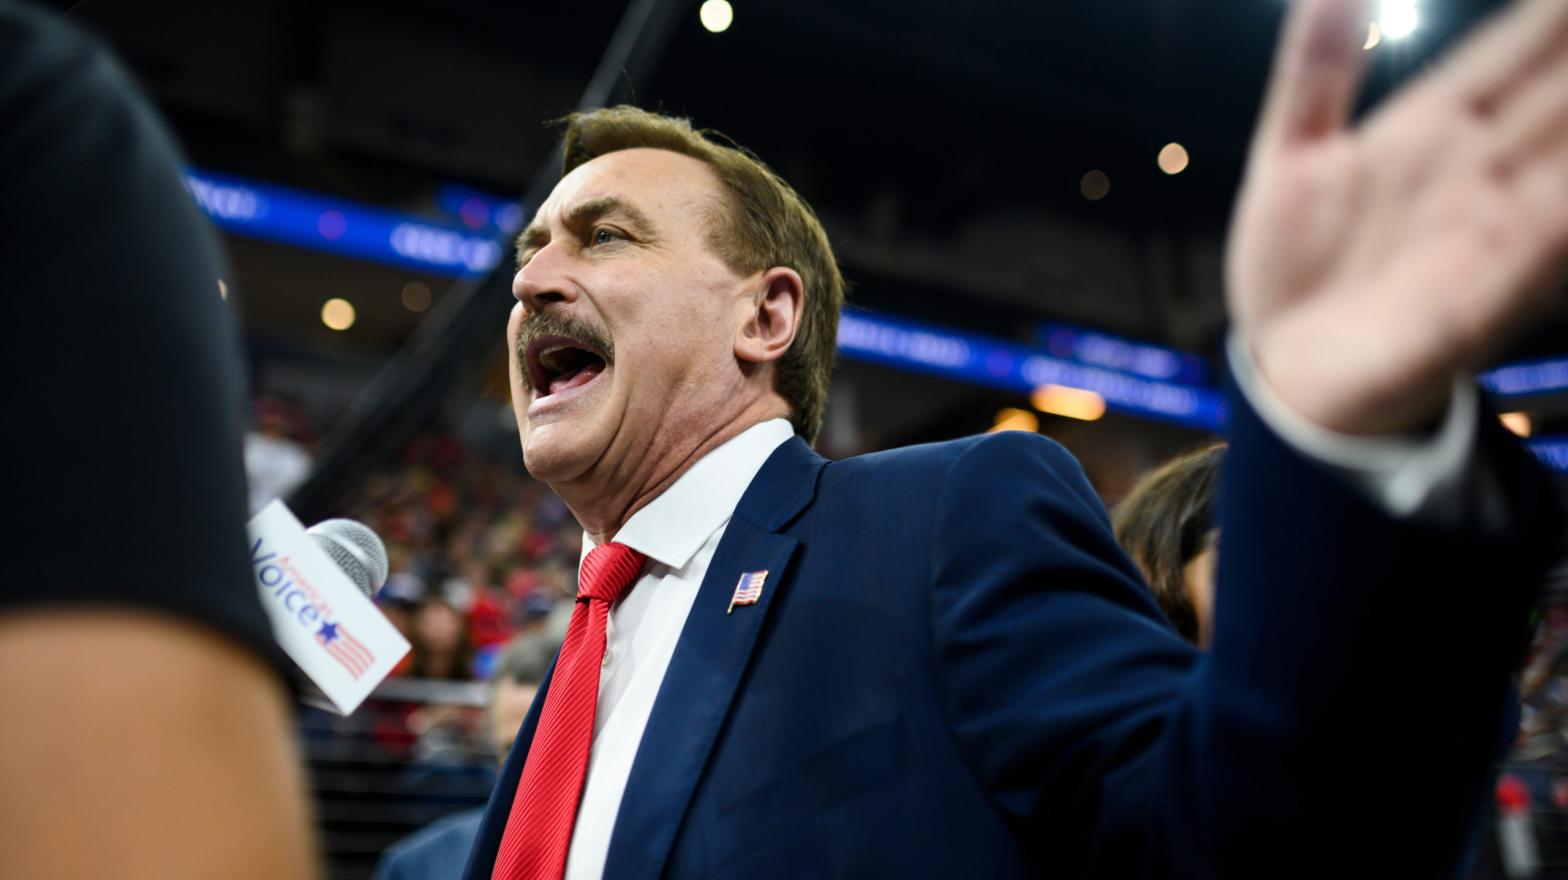 Mike Lindell, CEO and founder of MyPillow, and a possibly entirely fictional social media site named Frank. (Photo: Stephen Maturen, Getty Images)